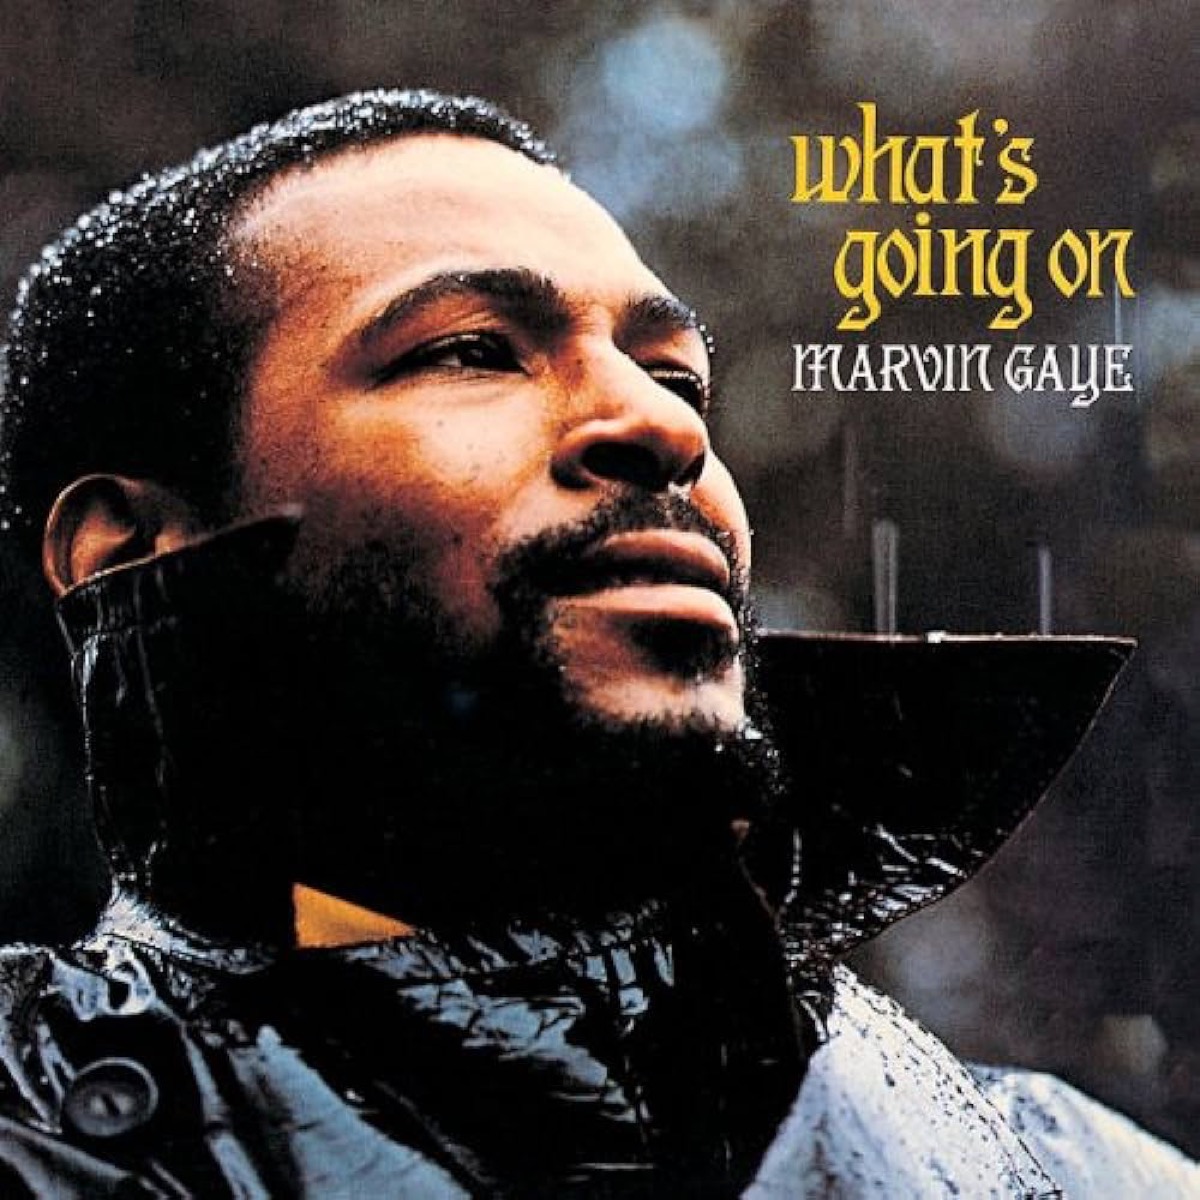 "What's Going On" by Marvin Gaye album cover